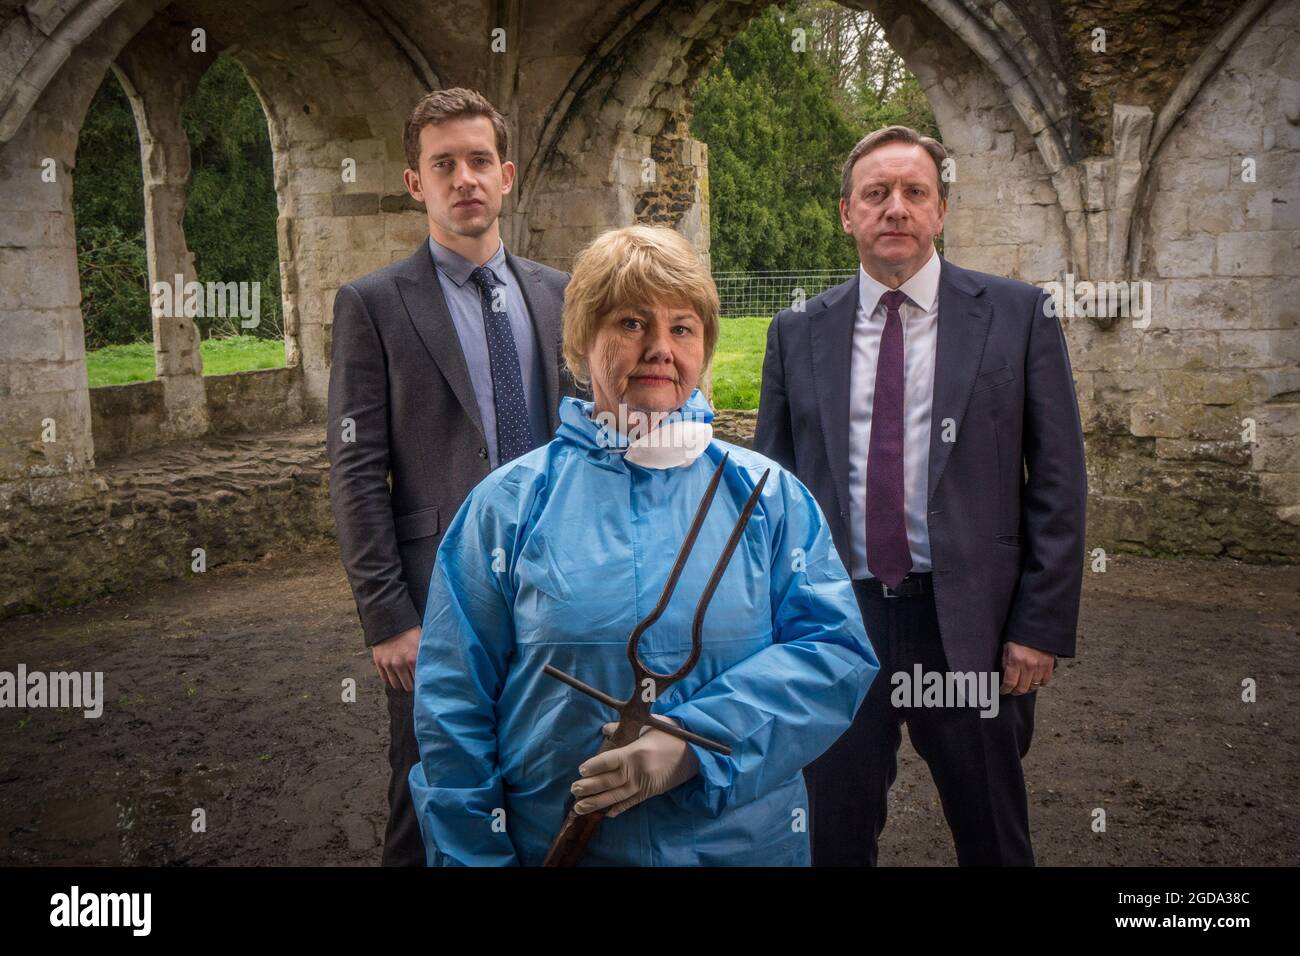 Midsomer Murder Xx Ep1 The Ghost Of Causton Abbey Fleur Perkins The New Forensic Pathologist 